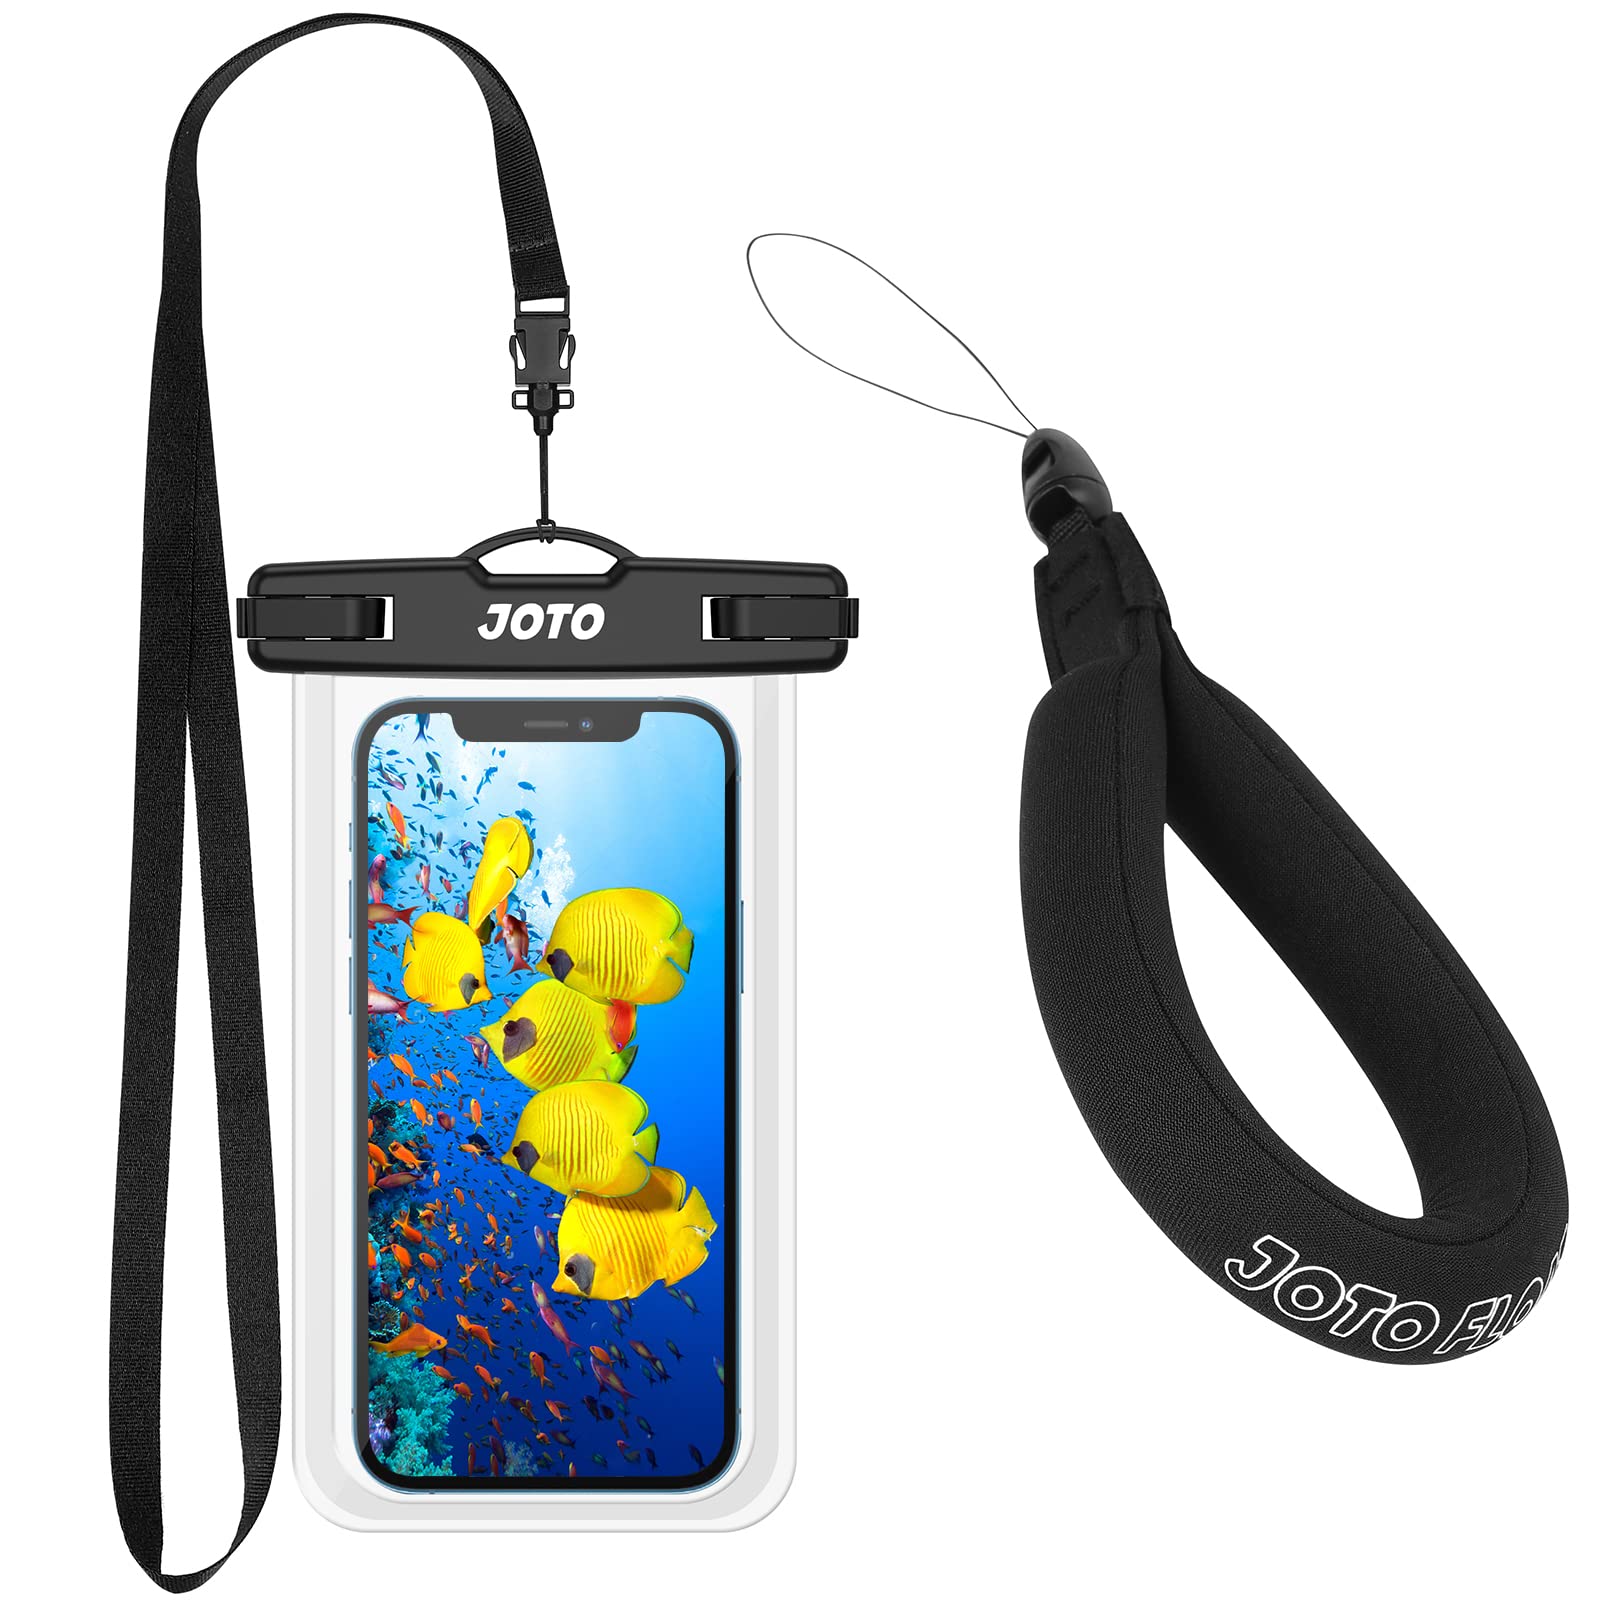 Stylish Protection: Attaching Ubeesize To Your IPhone Waterproof Cover With Wrist Strap